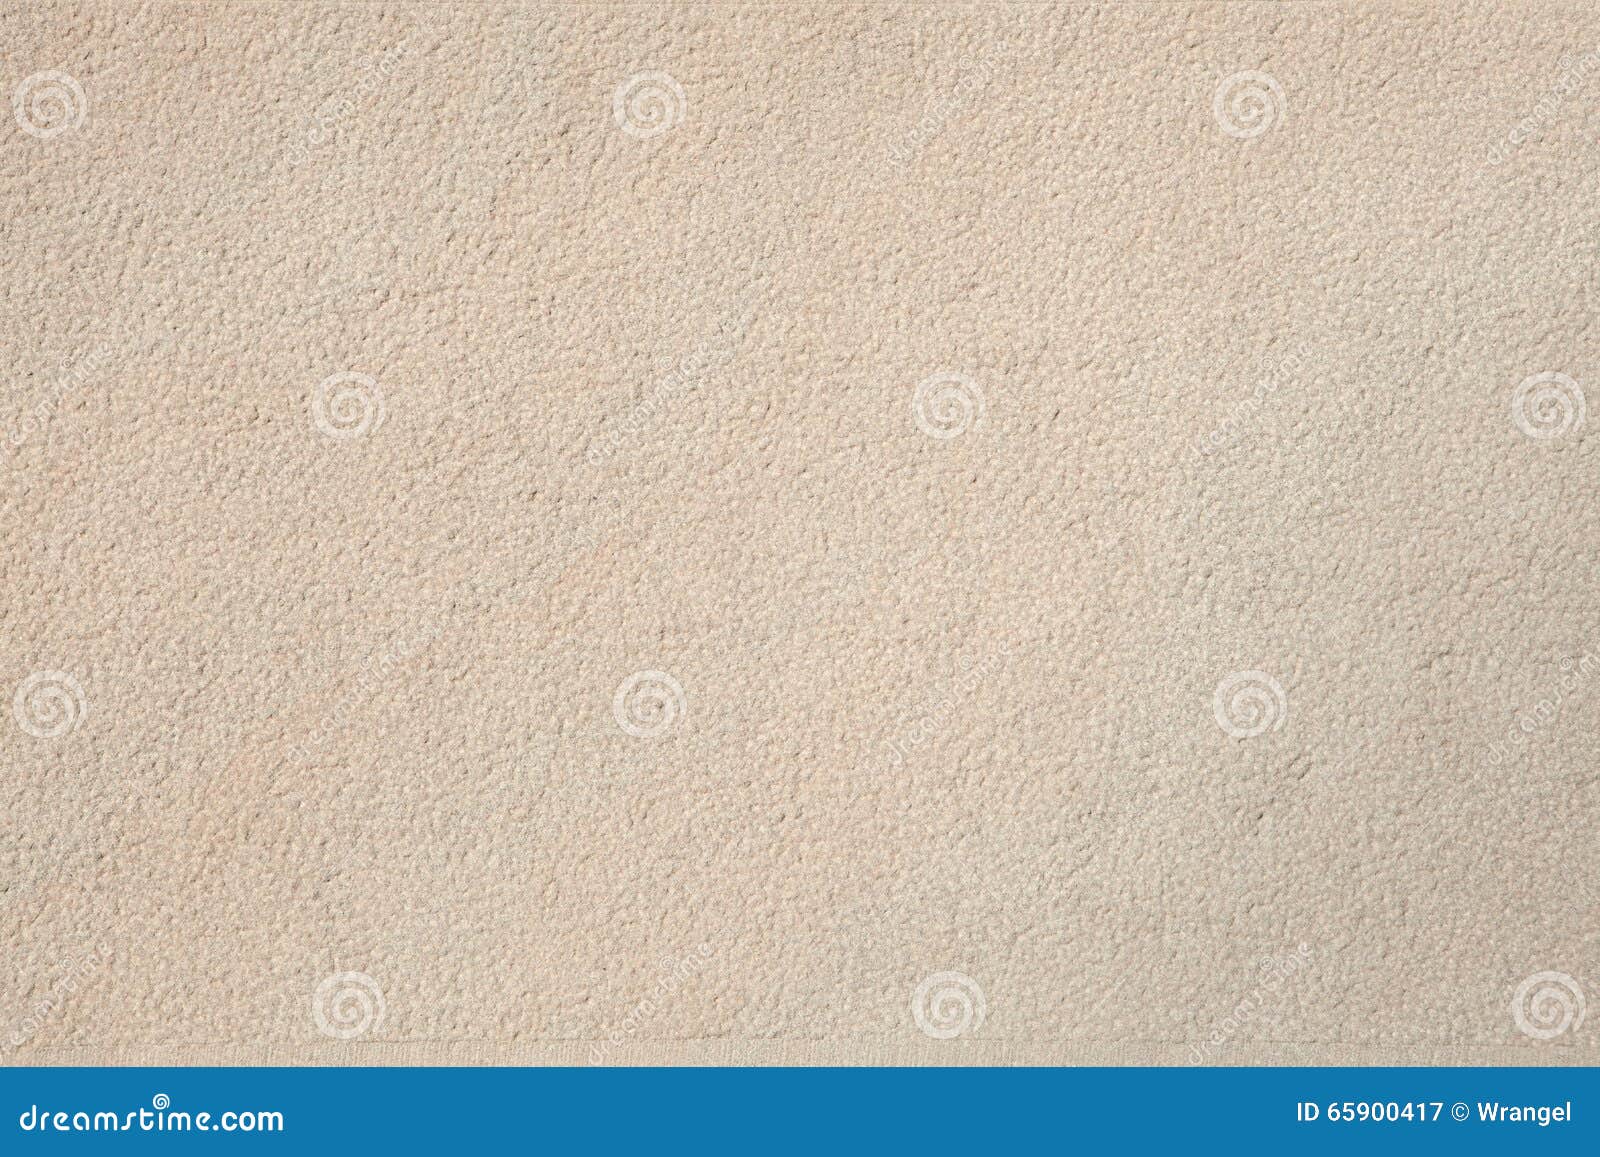 Beige Stone Wall Background Texture Stock Image Image Of